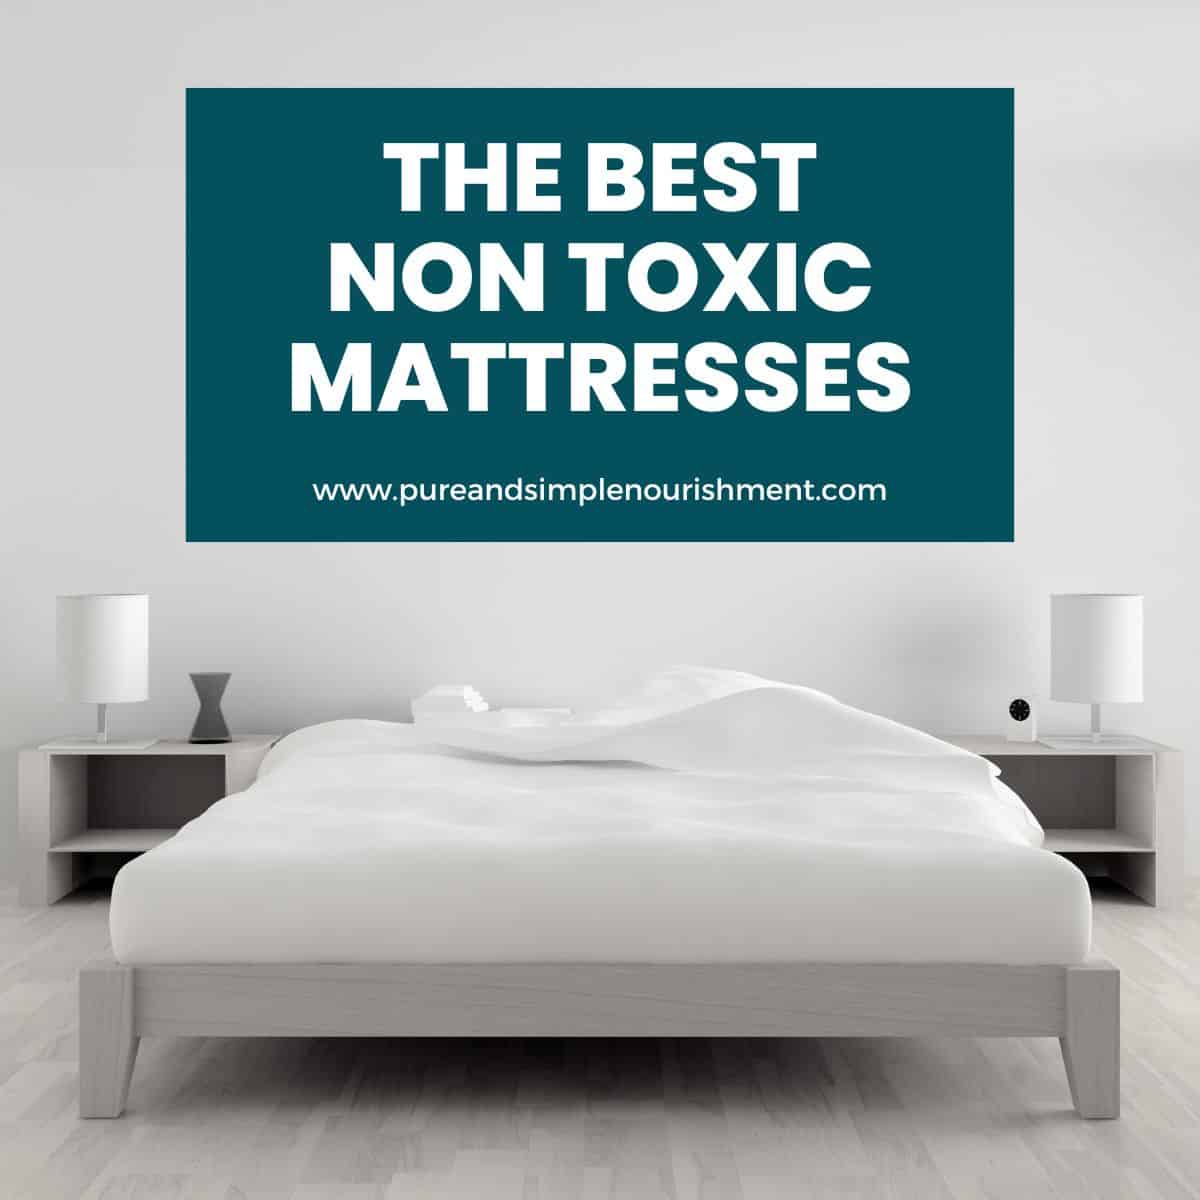 A bed with two side tables beside it with lamps on them and the title The Best Non Toxic Mattresses over it.